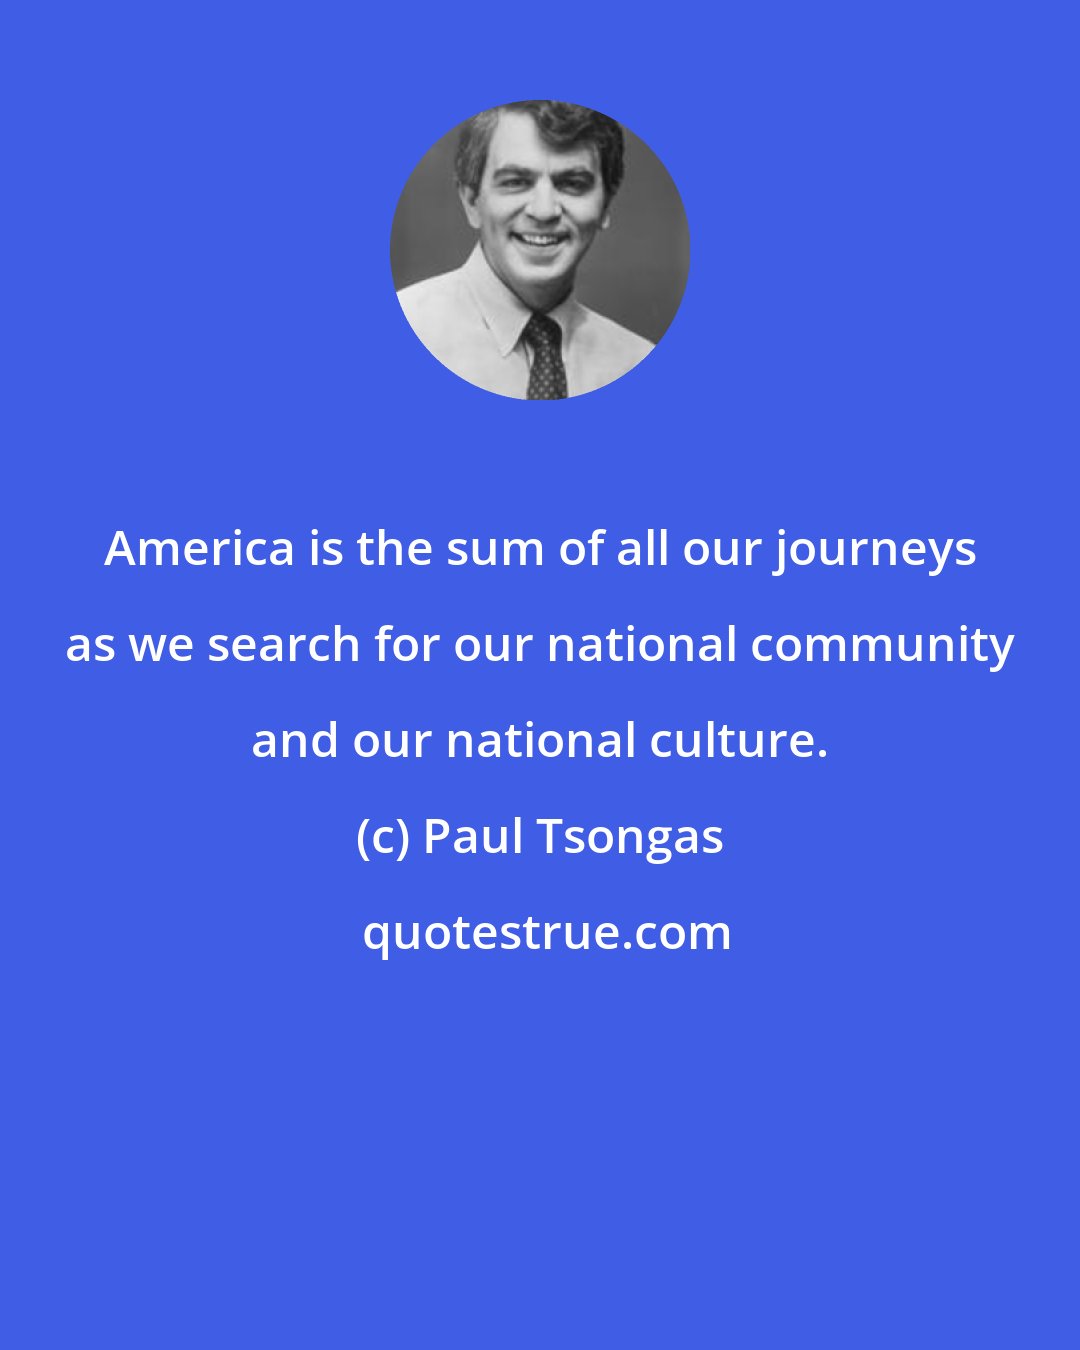 Paul Tsongas: America is the sum of all our journeys as we search for our national community and our national culture.